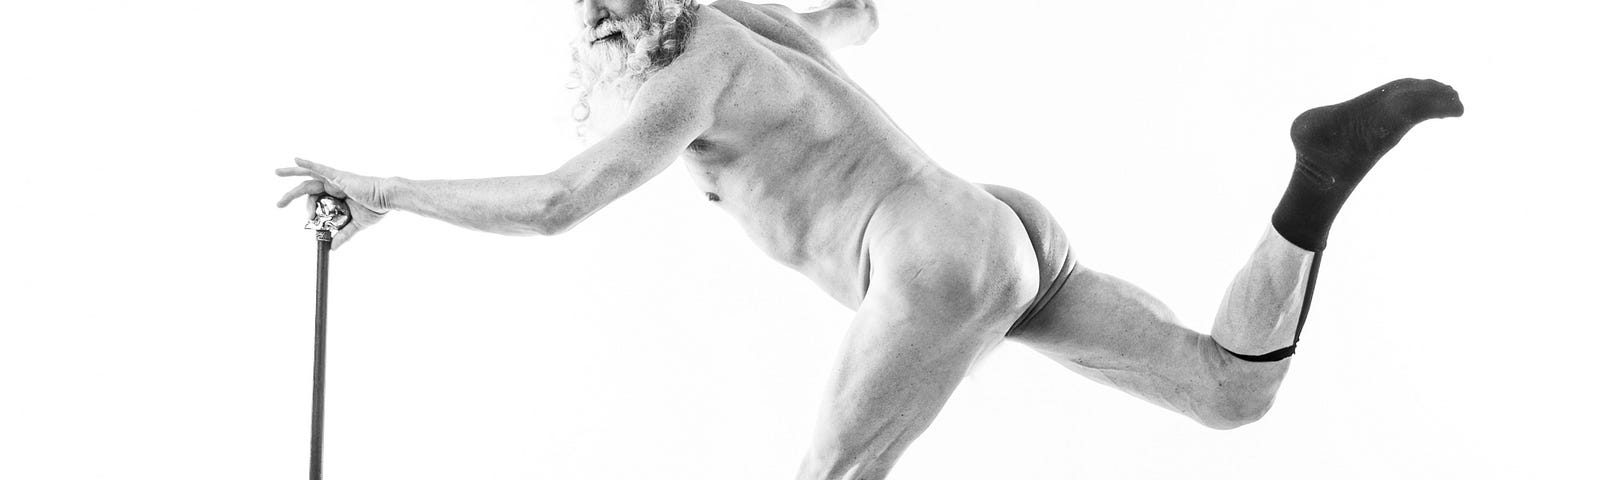 Naked man dancing with a cane and garters